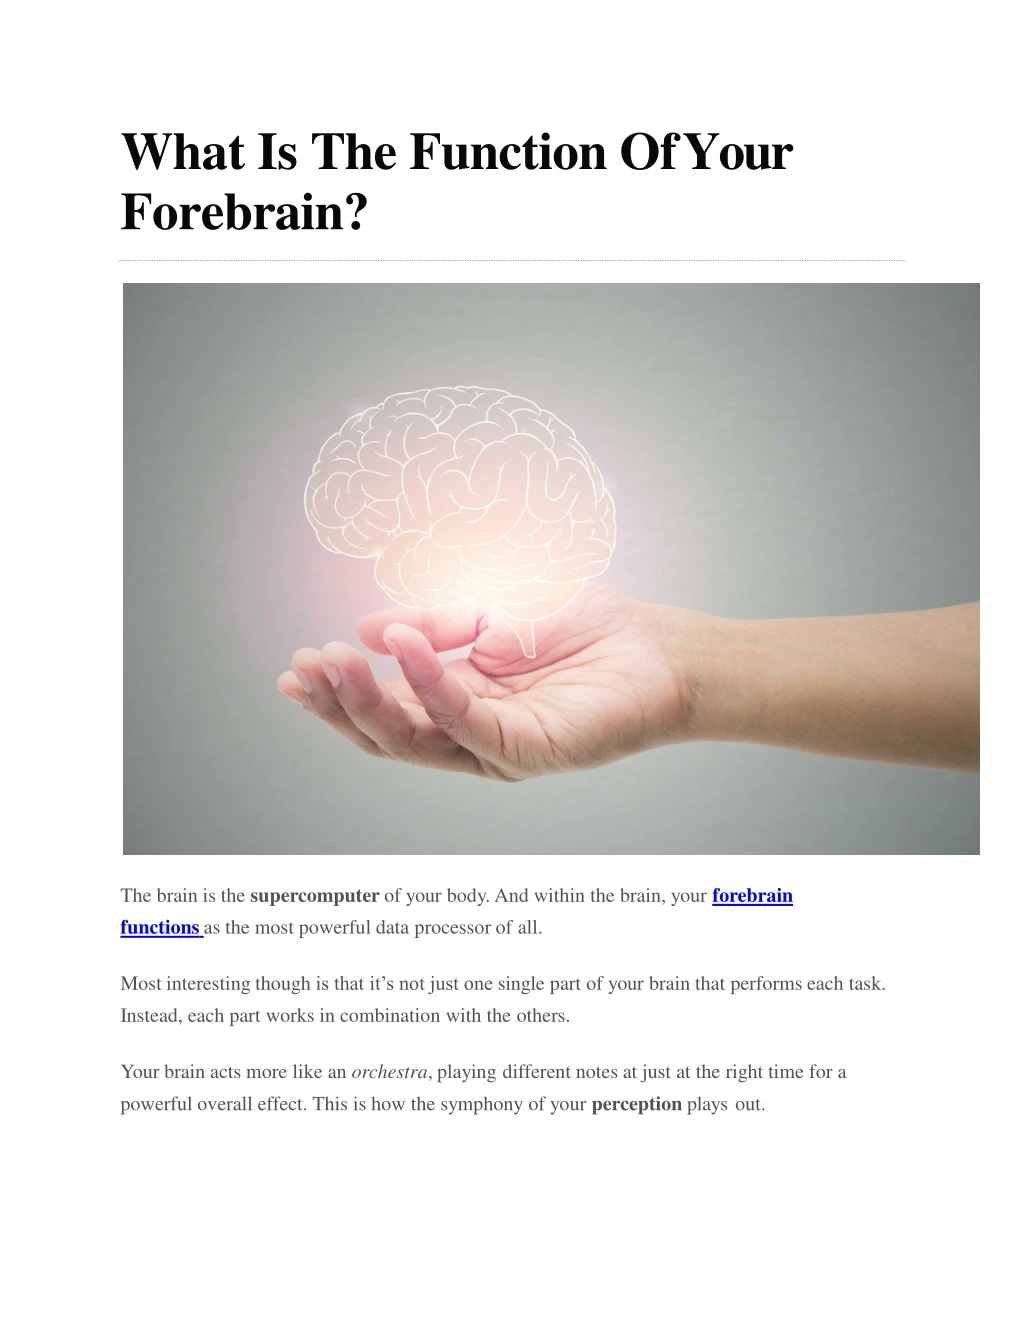 what is the function of your forebrain